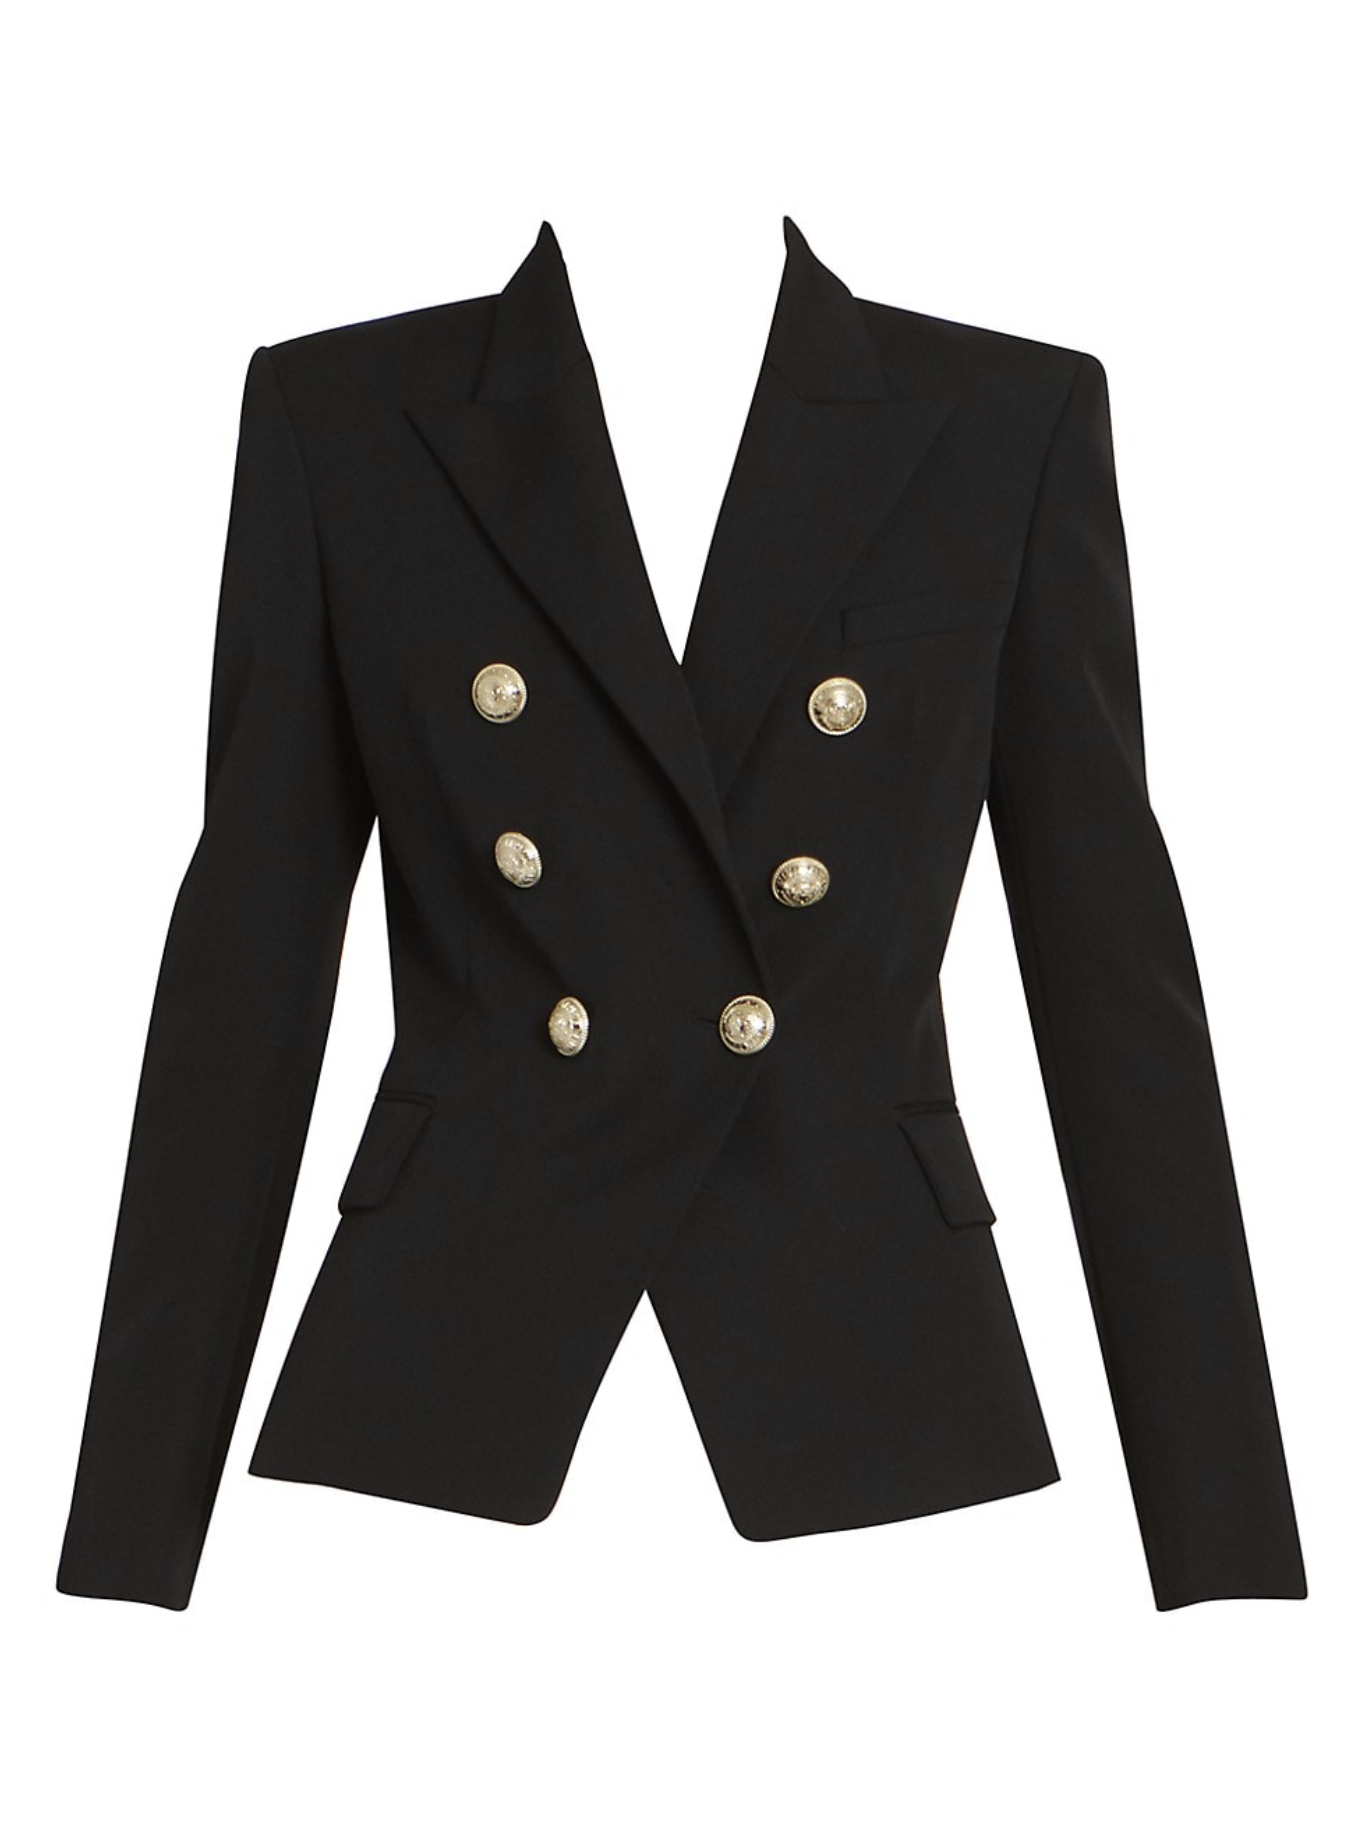 Balmain Wool Double-Breasted Jacket - Busbee - Fashion Over 40